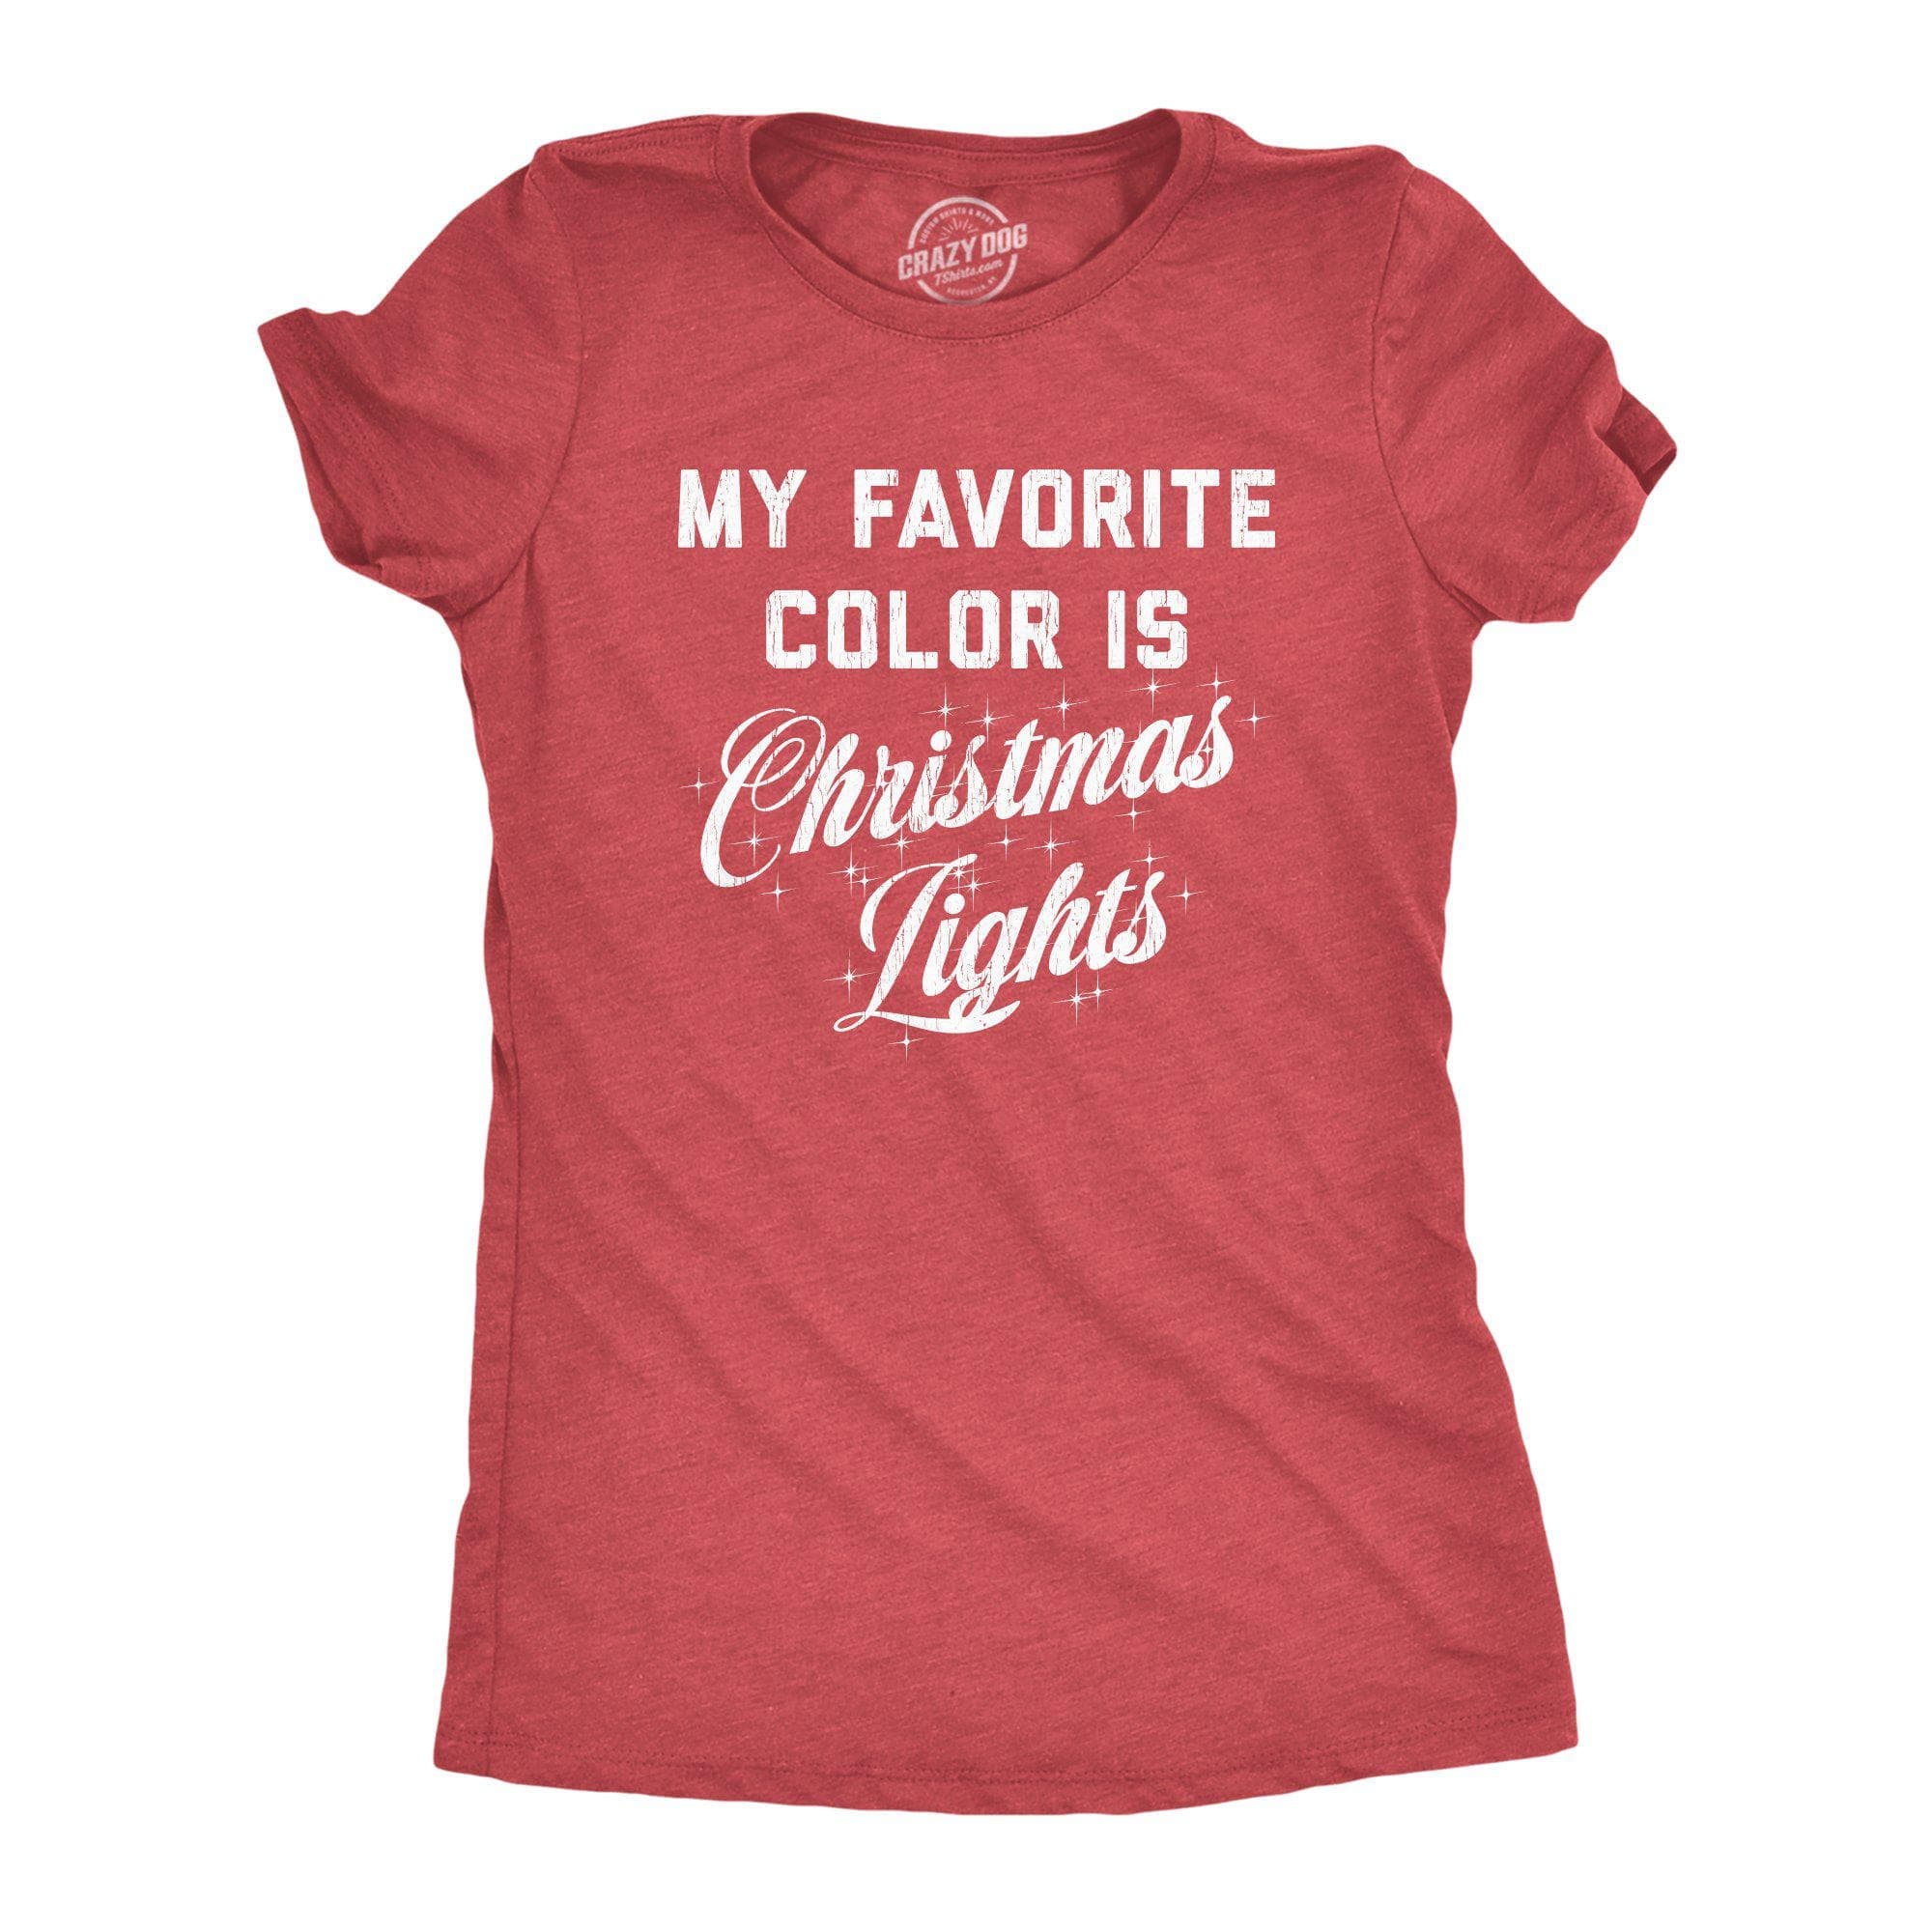 My Favorite Color Is Christmas Lights Women's Tshirt - Crazy Dog T-Shirts